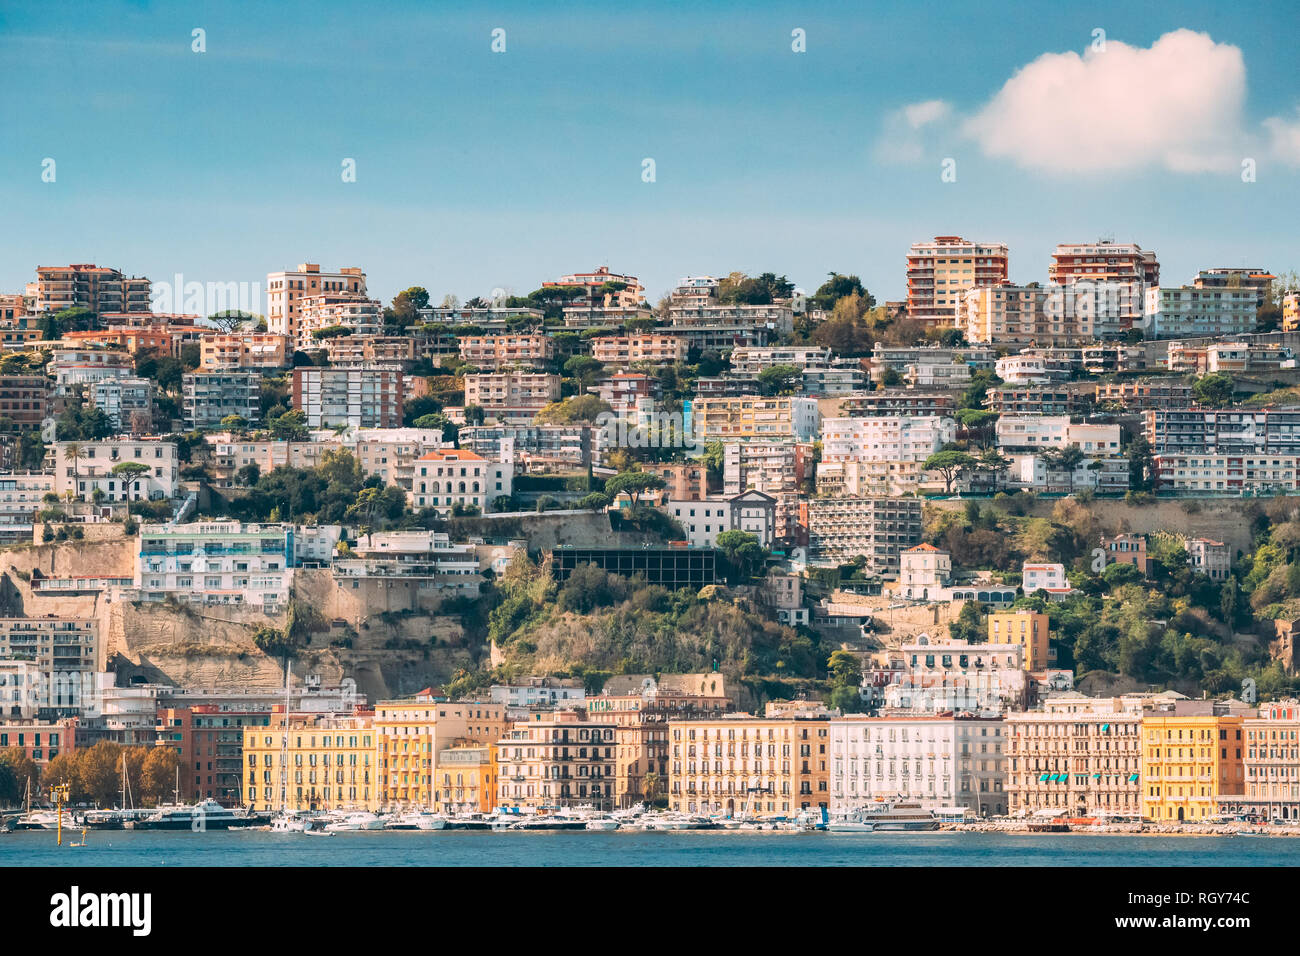 Naples, Italy. Residential Area In Mergellina District. Hilly Cityscape In Summer Sunny Day Under Blue Cloudy Sky. Stock Photo